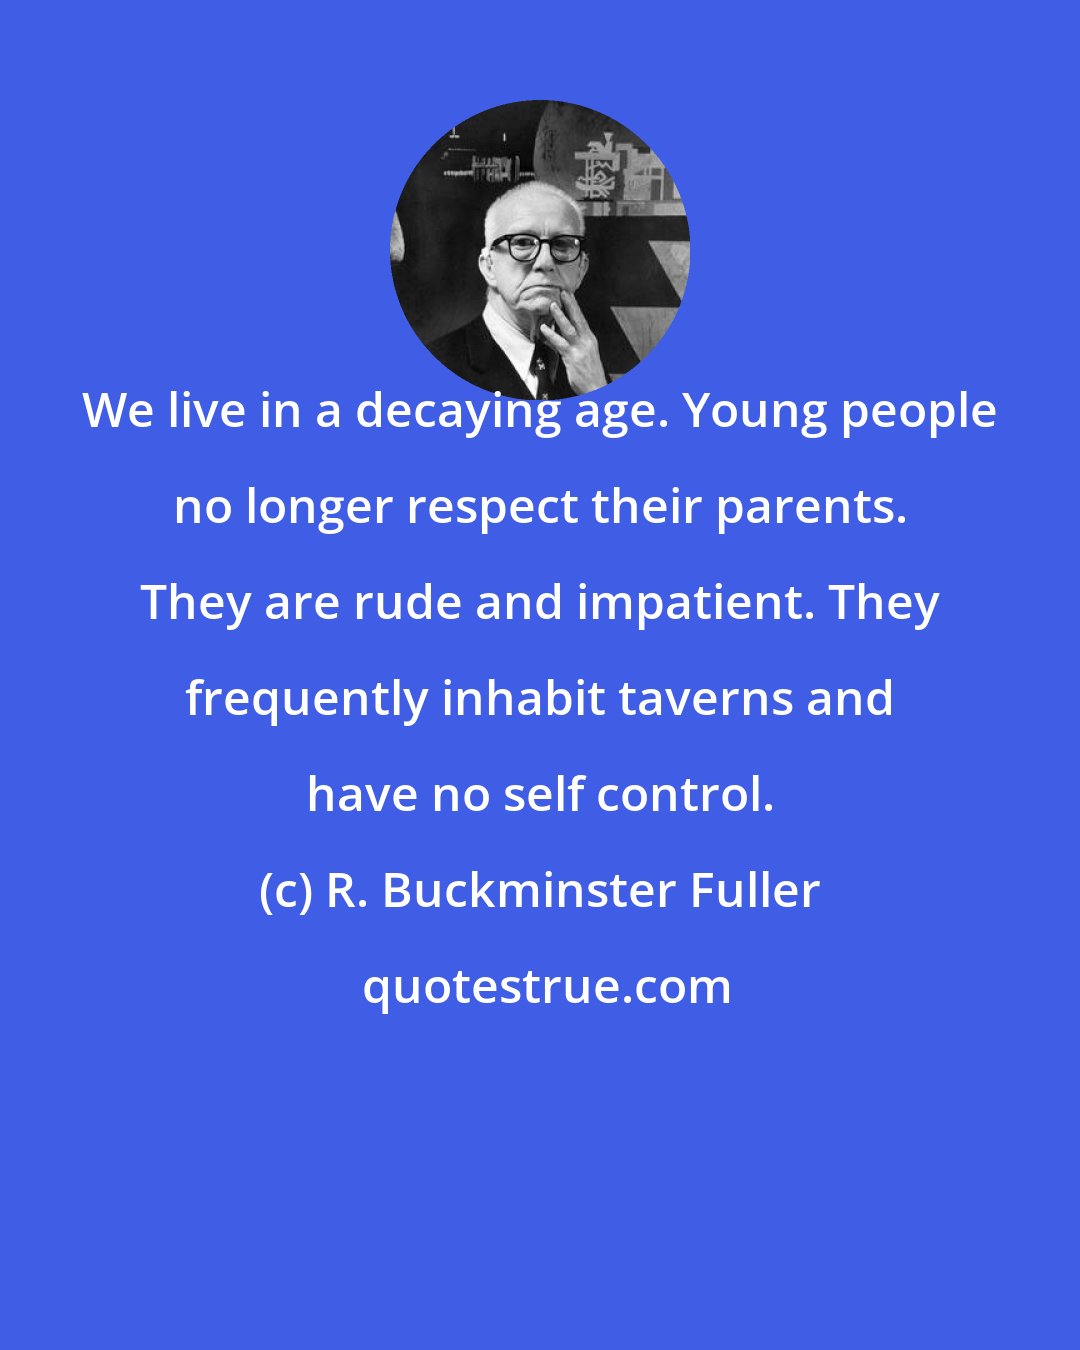 R. Buckminster Fuller: We live in a decaying age. Young people no longer respect their parents. They are rude and impatient. They frequently inhabit taverns and have no self control.